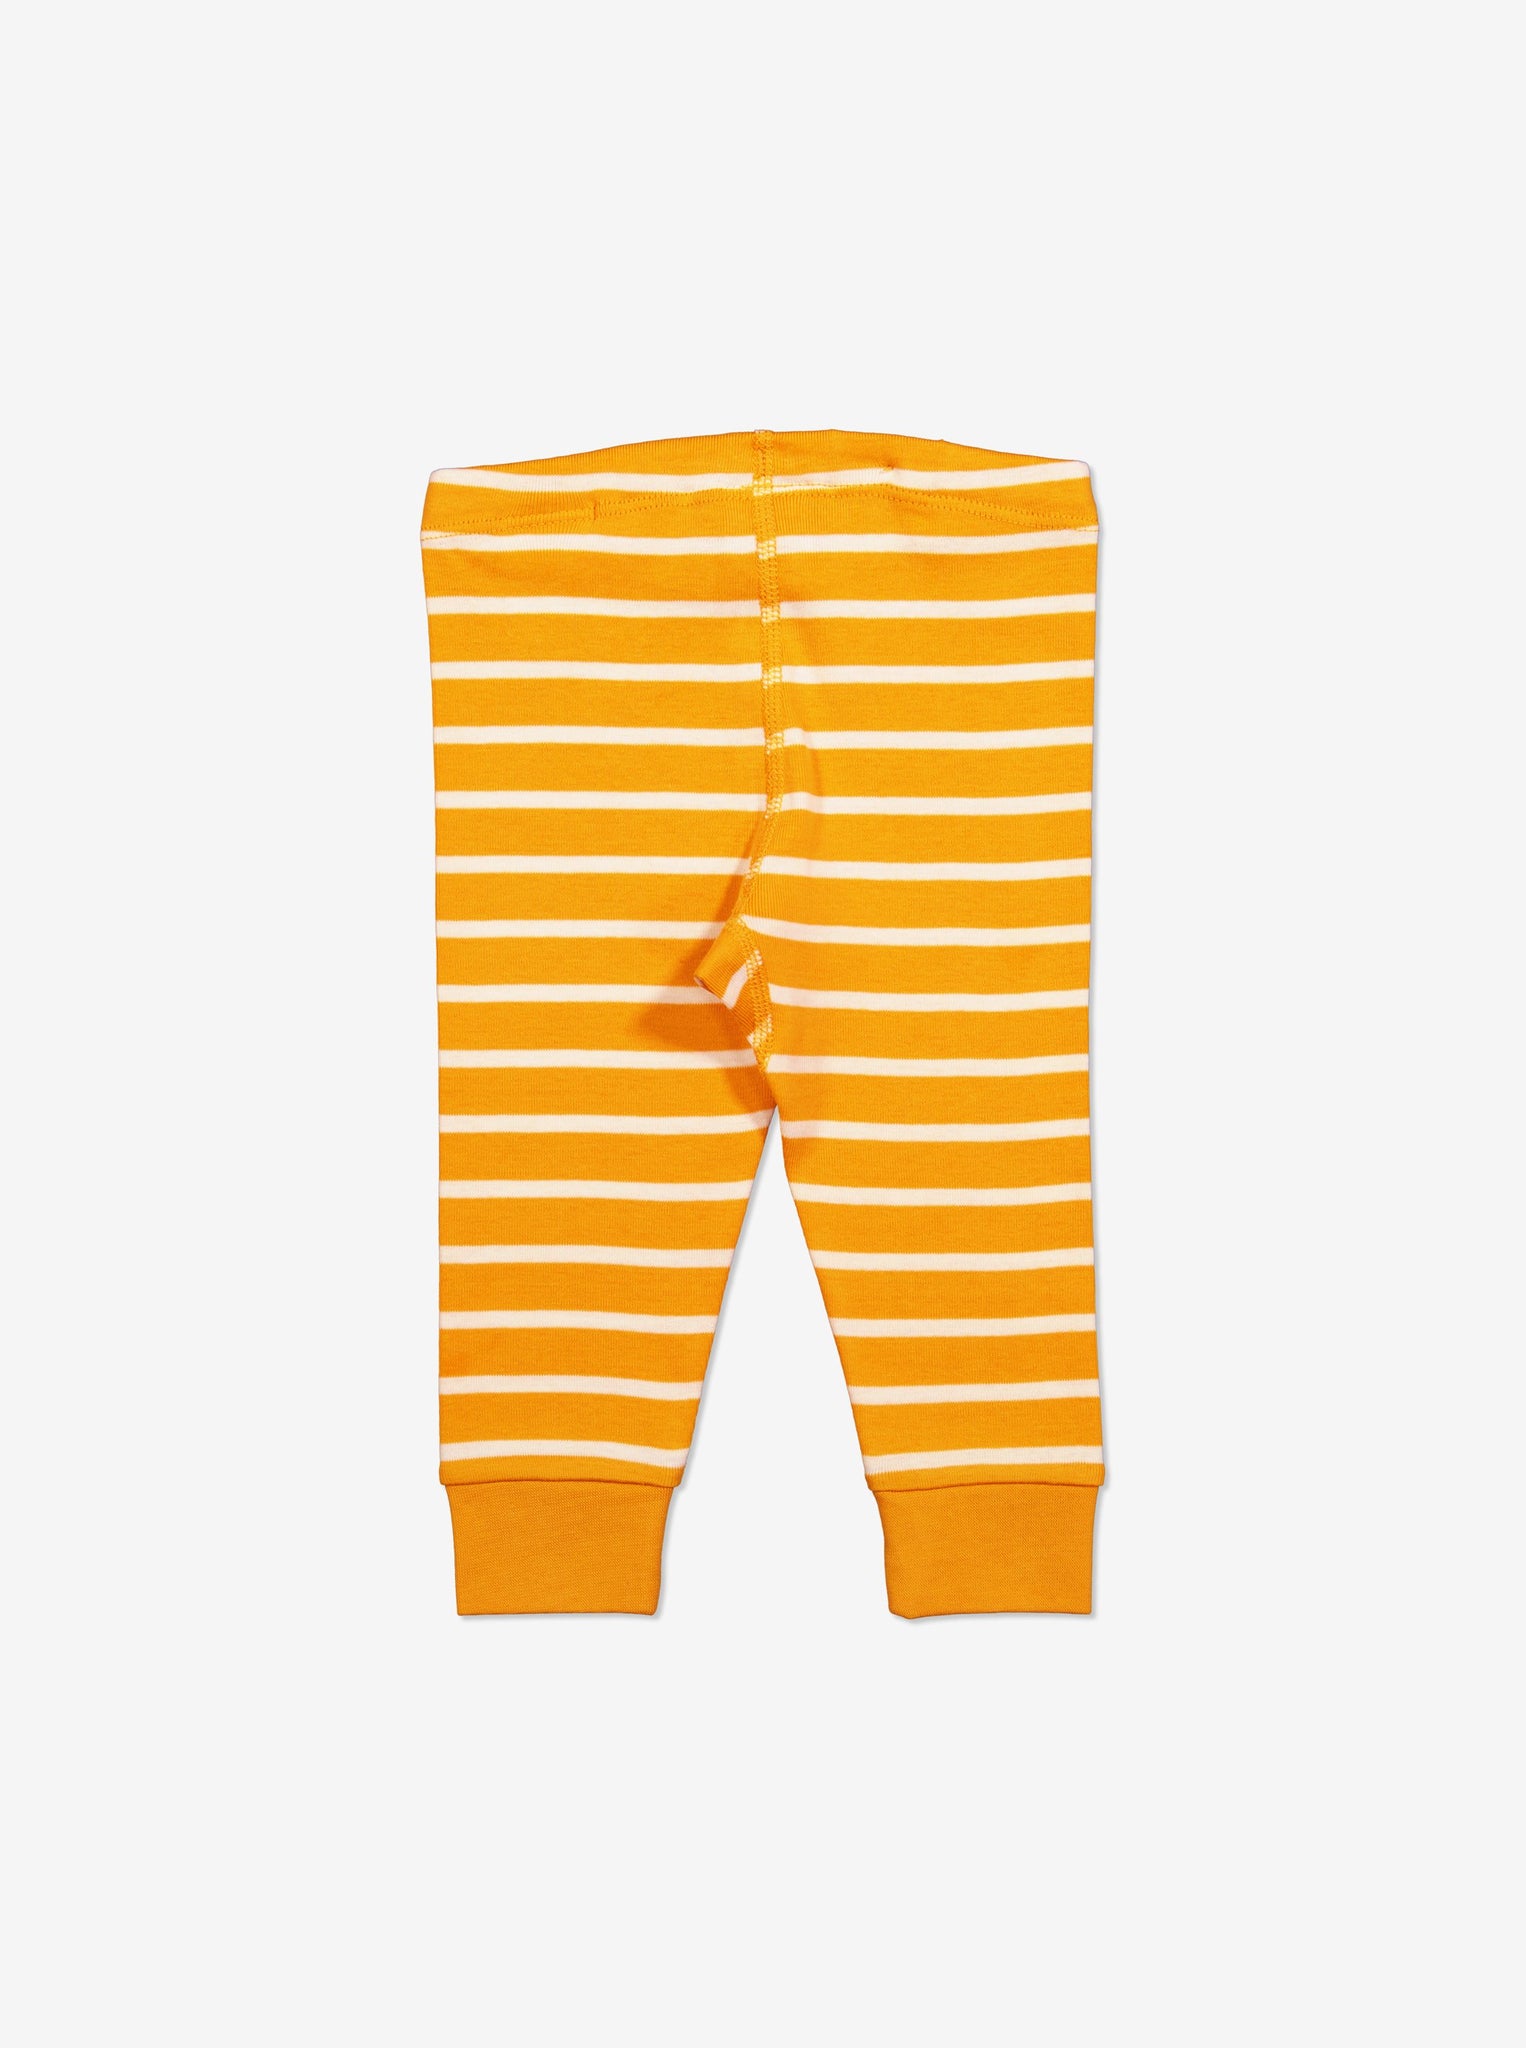  Organic Stripd Yellow Baby Leggings from Polarn O. Pyret Kidswear. Made with 100% organic cotton.